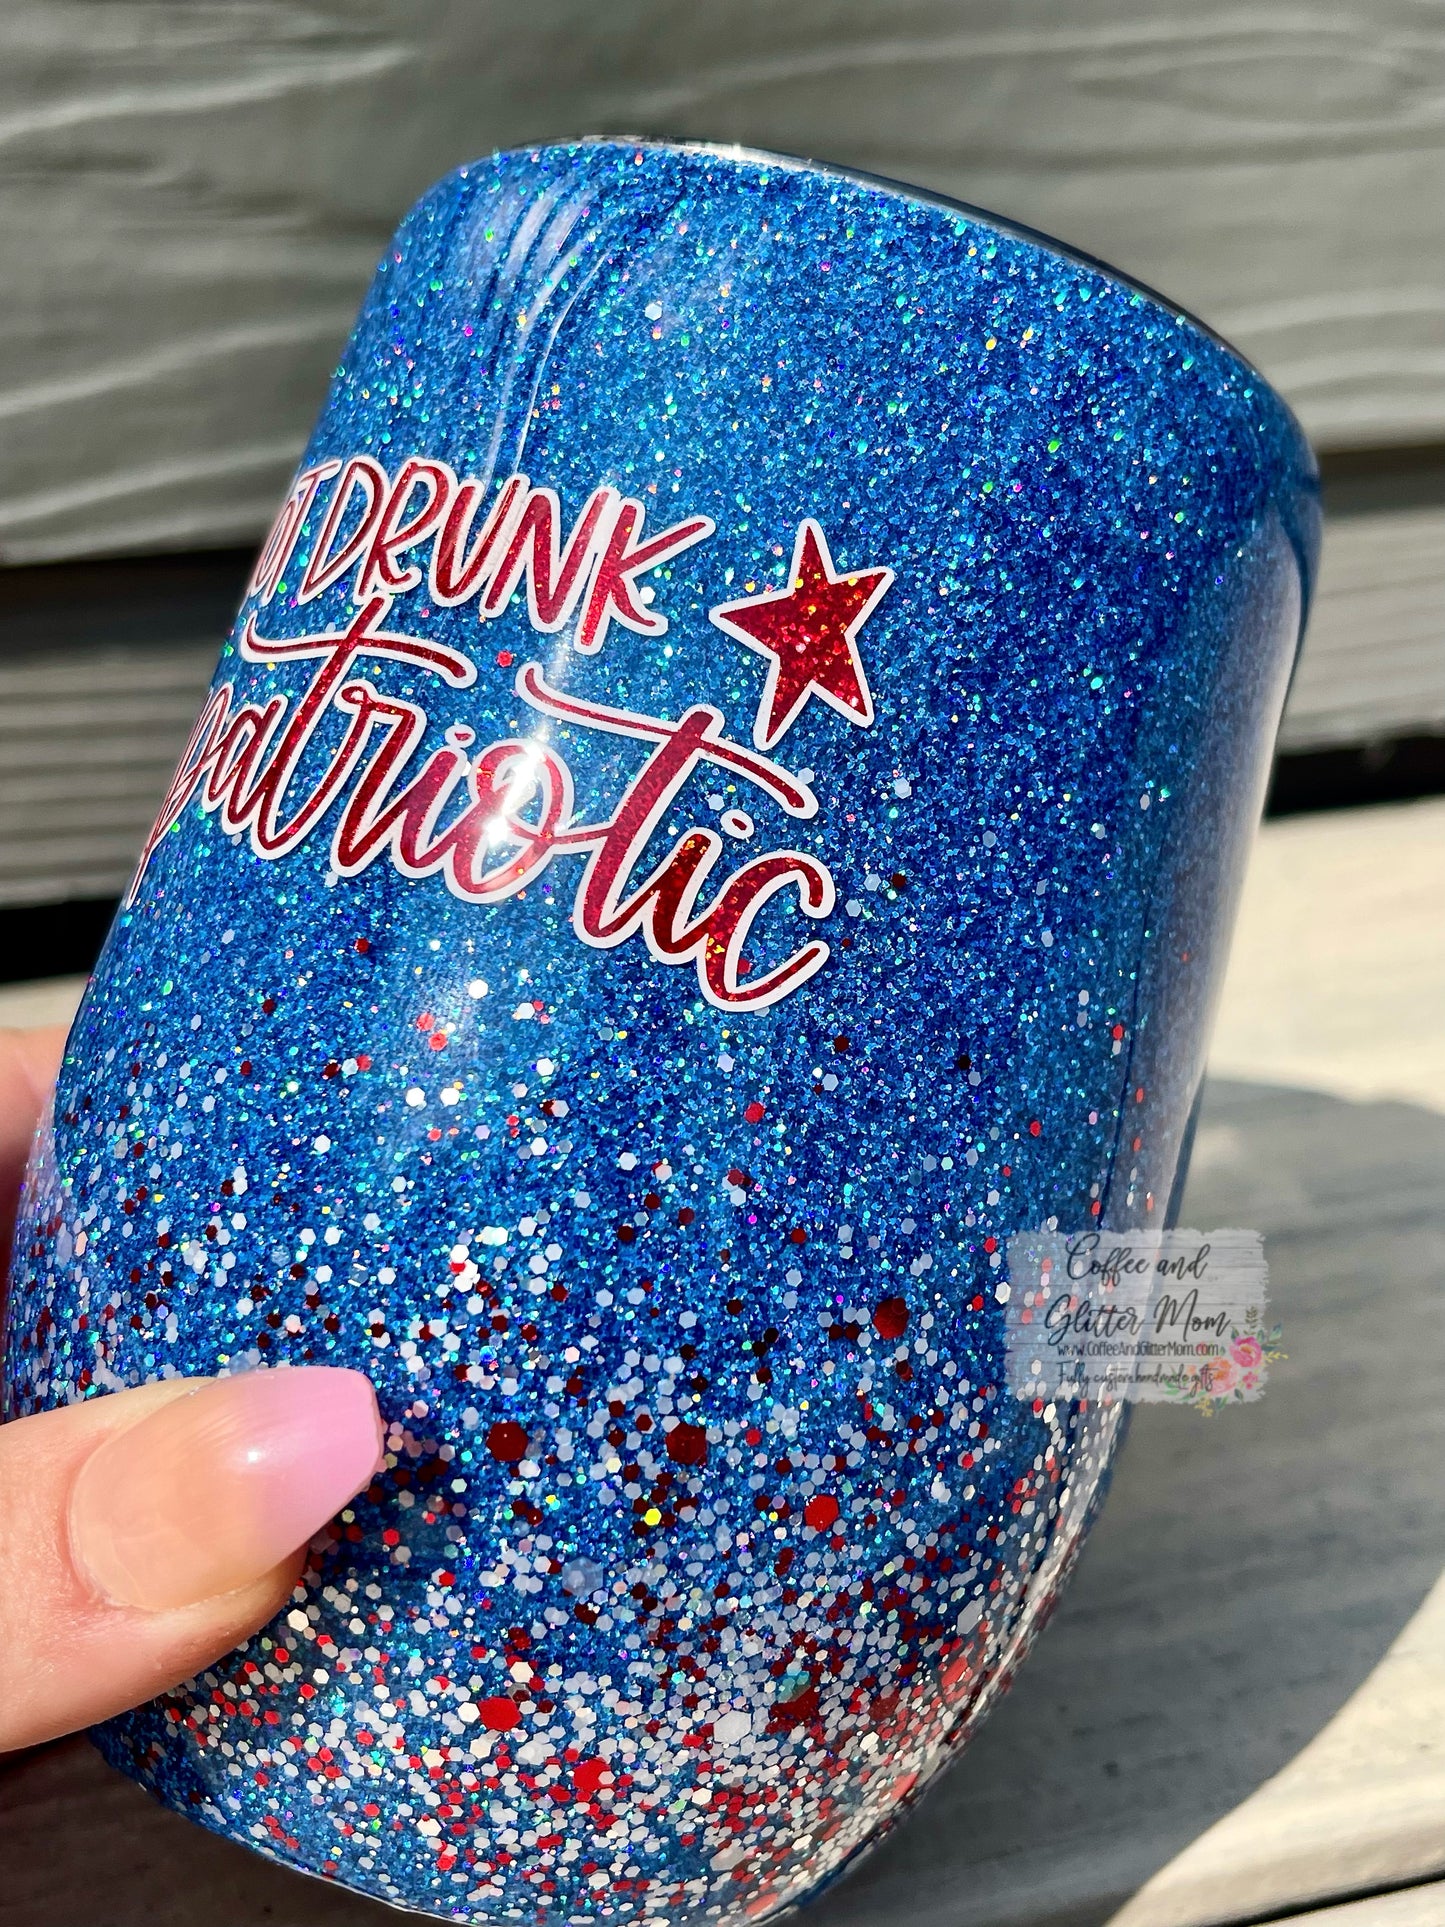 Not Drunk I'm Patriotic 15oz Wine Tumbler with Lid and Straw